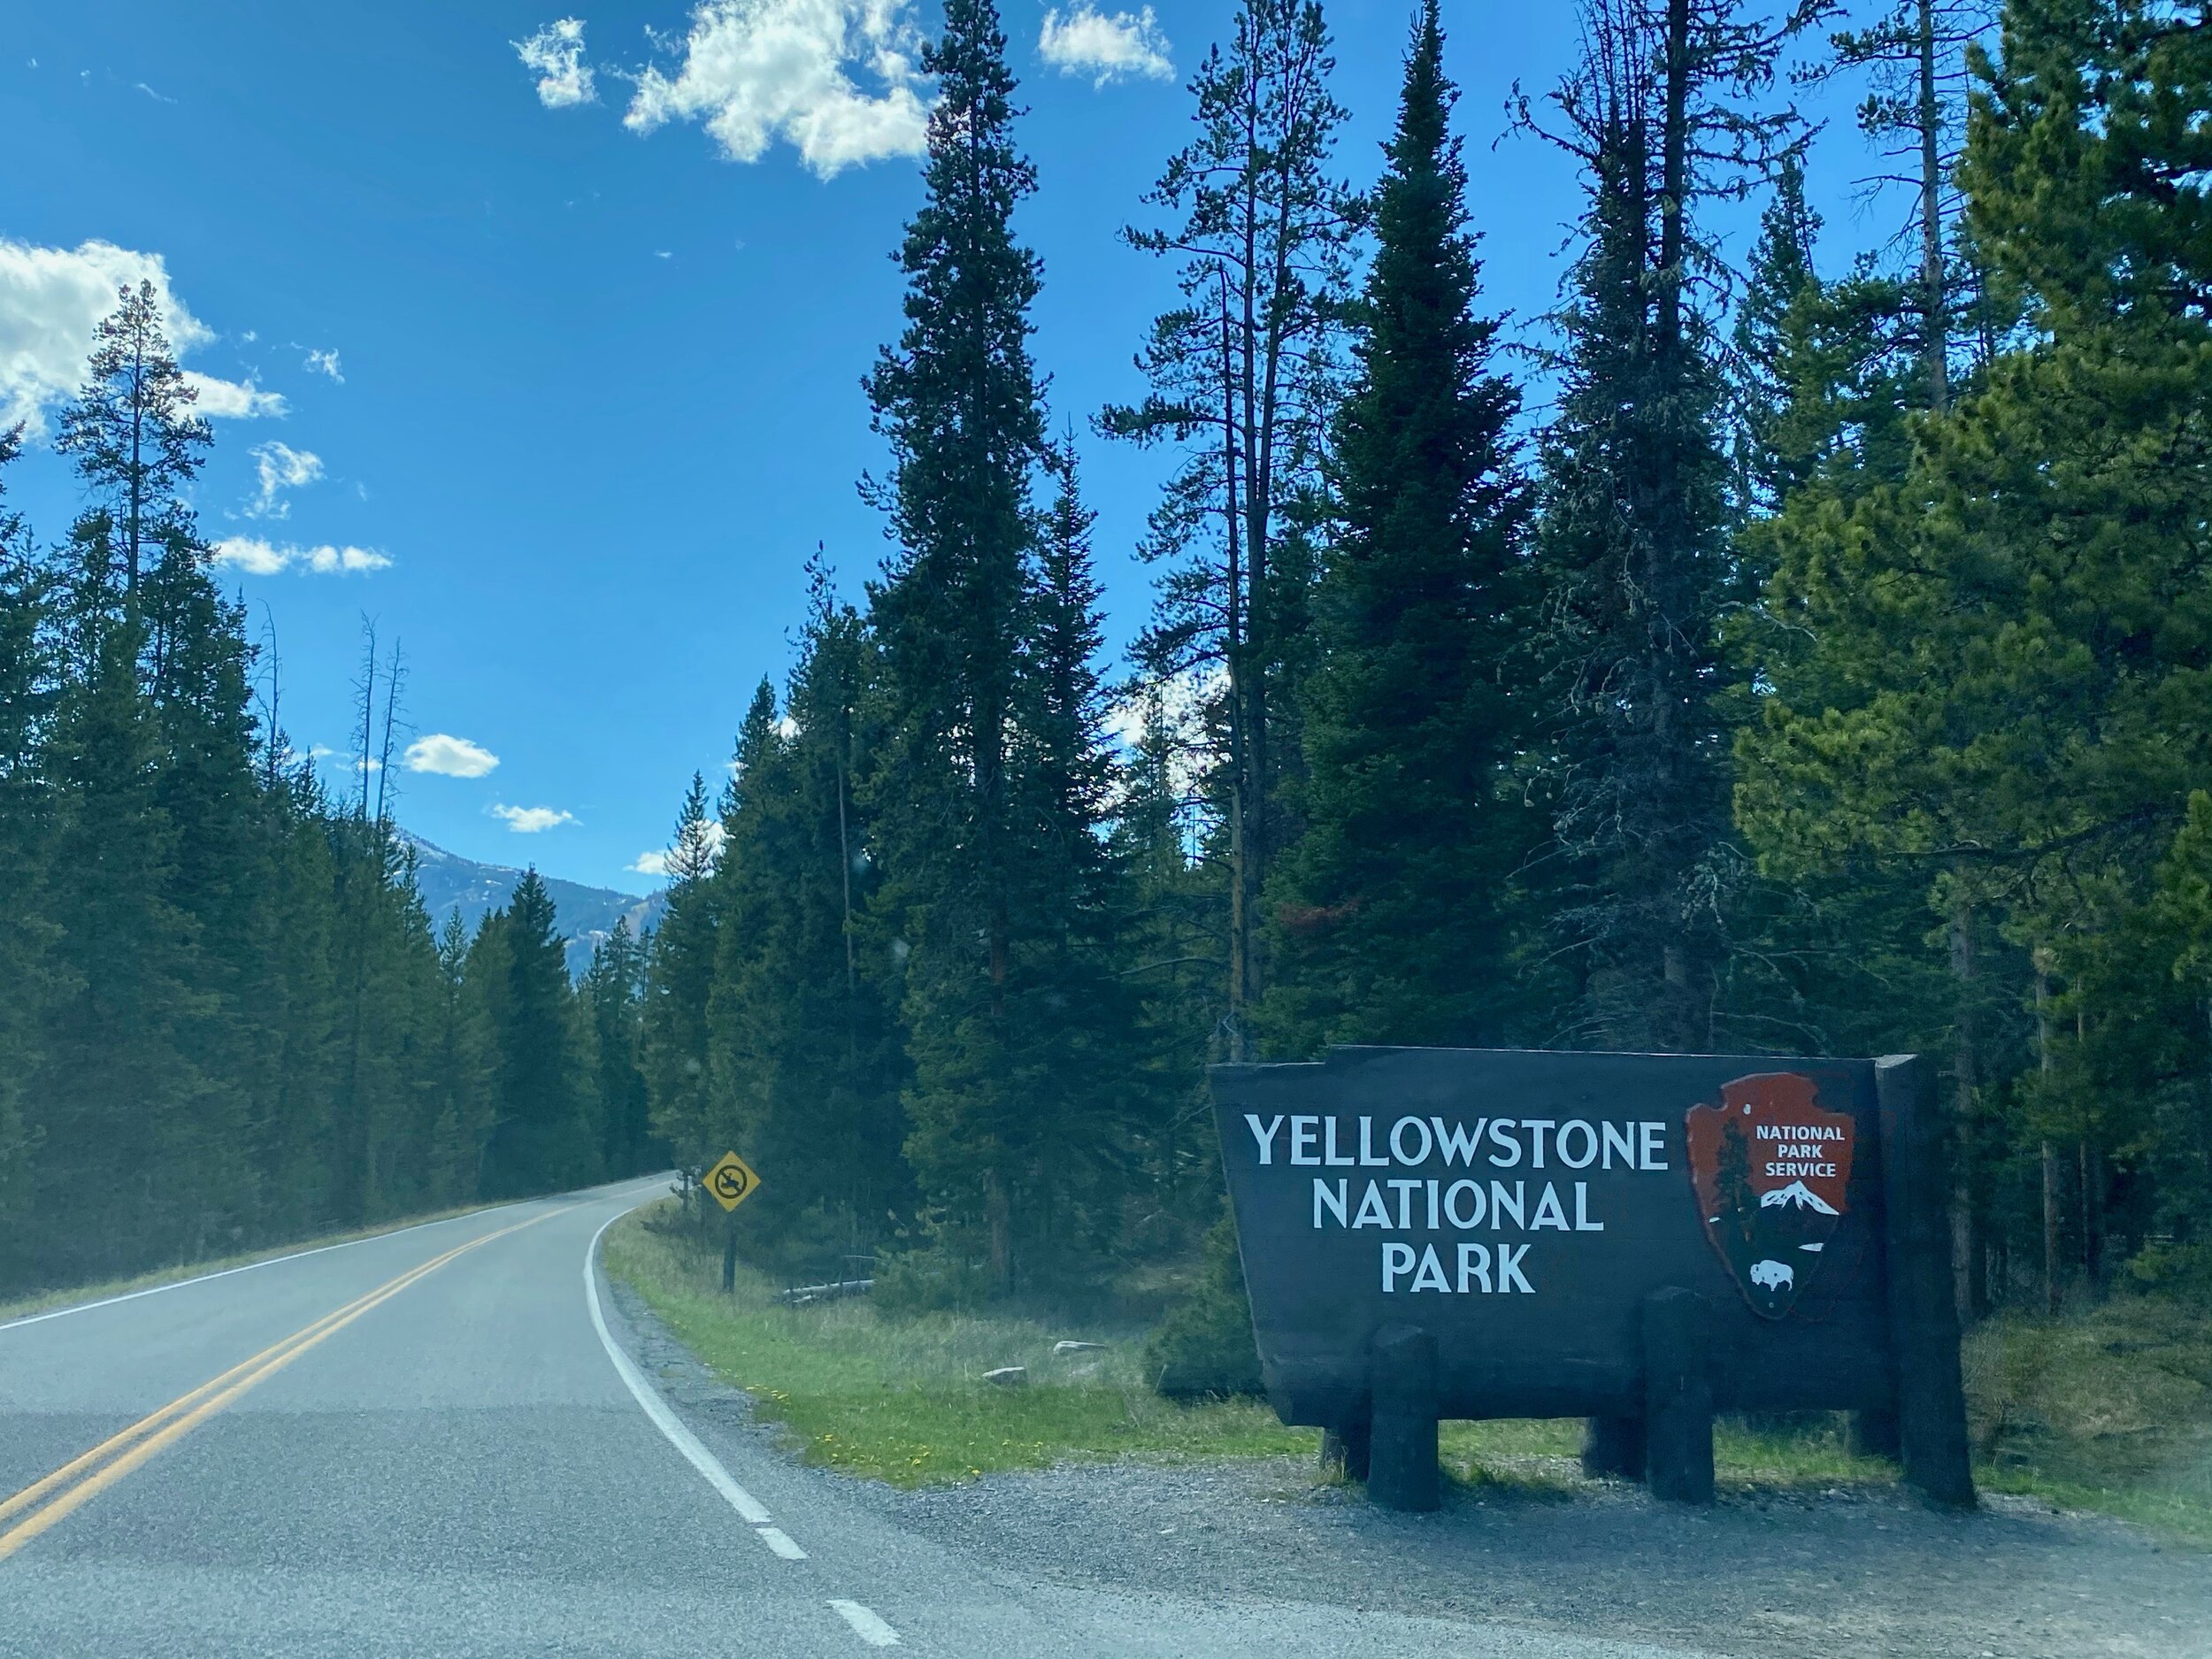 The Northeast Yellowstone entrance!  Photo by Karen Boudreaux, May 29, 2021